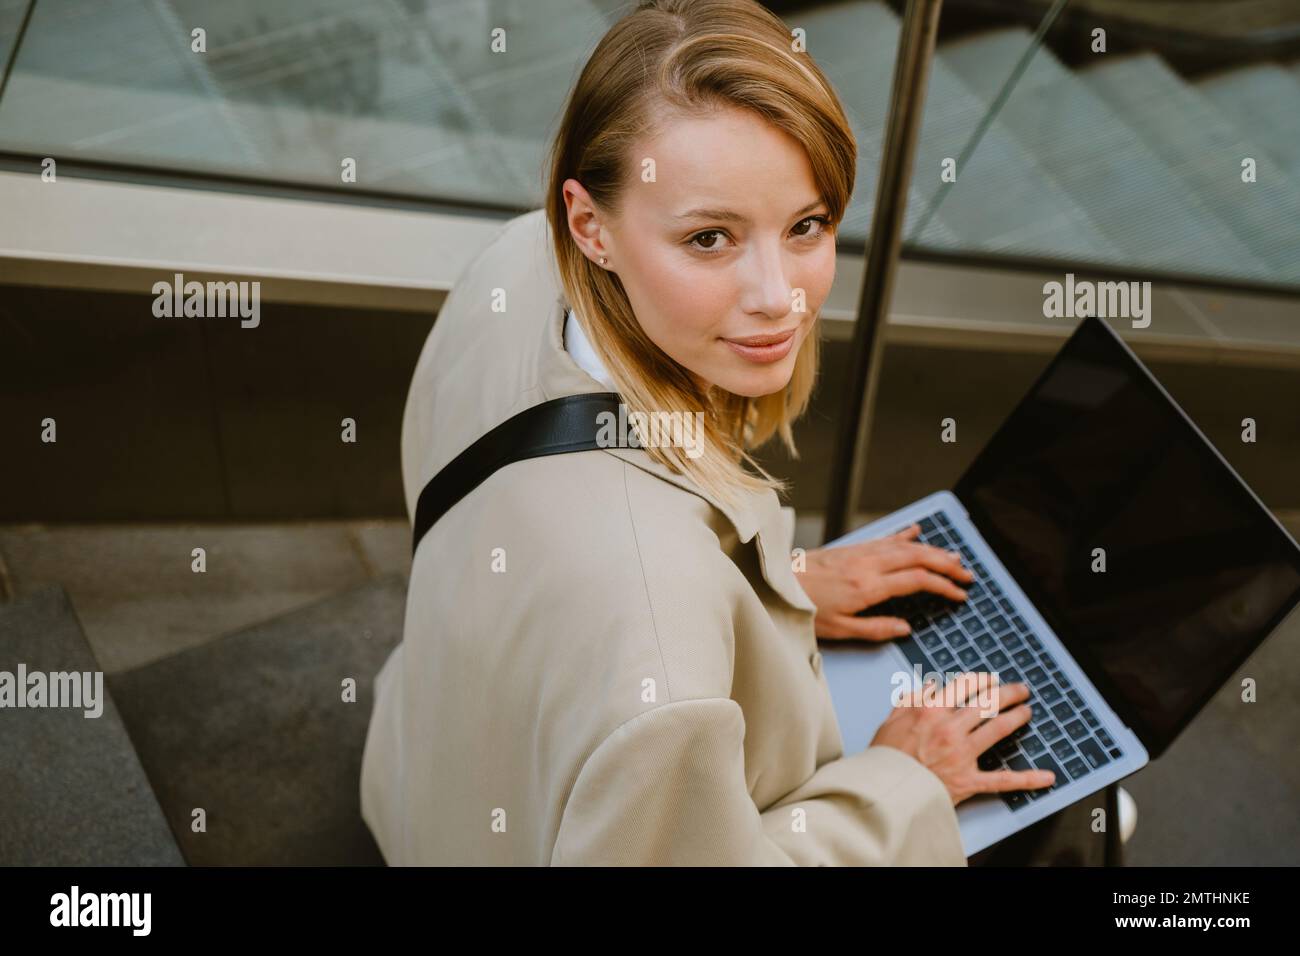 Young white woman smiling and using laptop while sitting on stairs outdoors Stock Photo